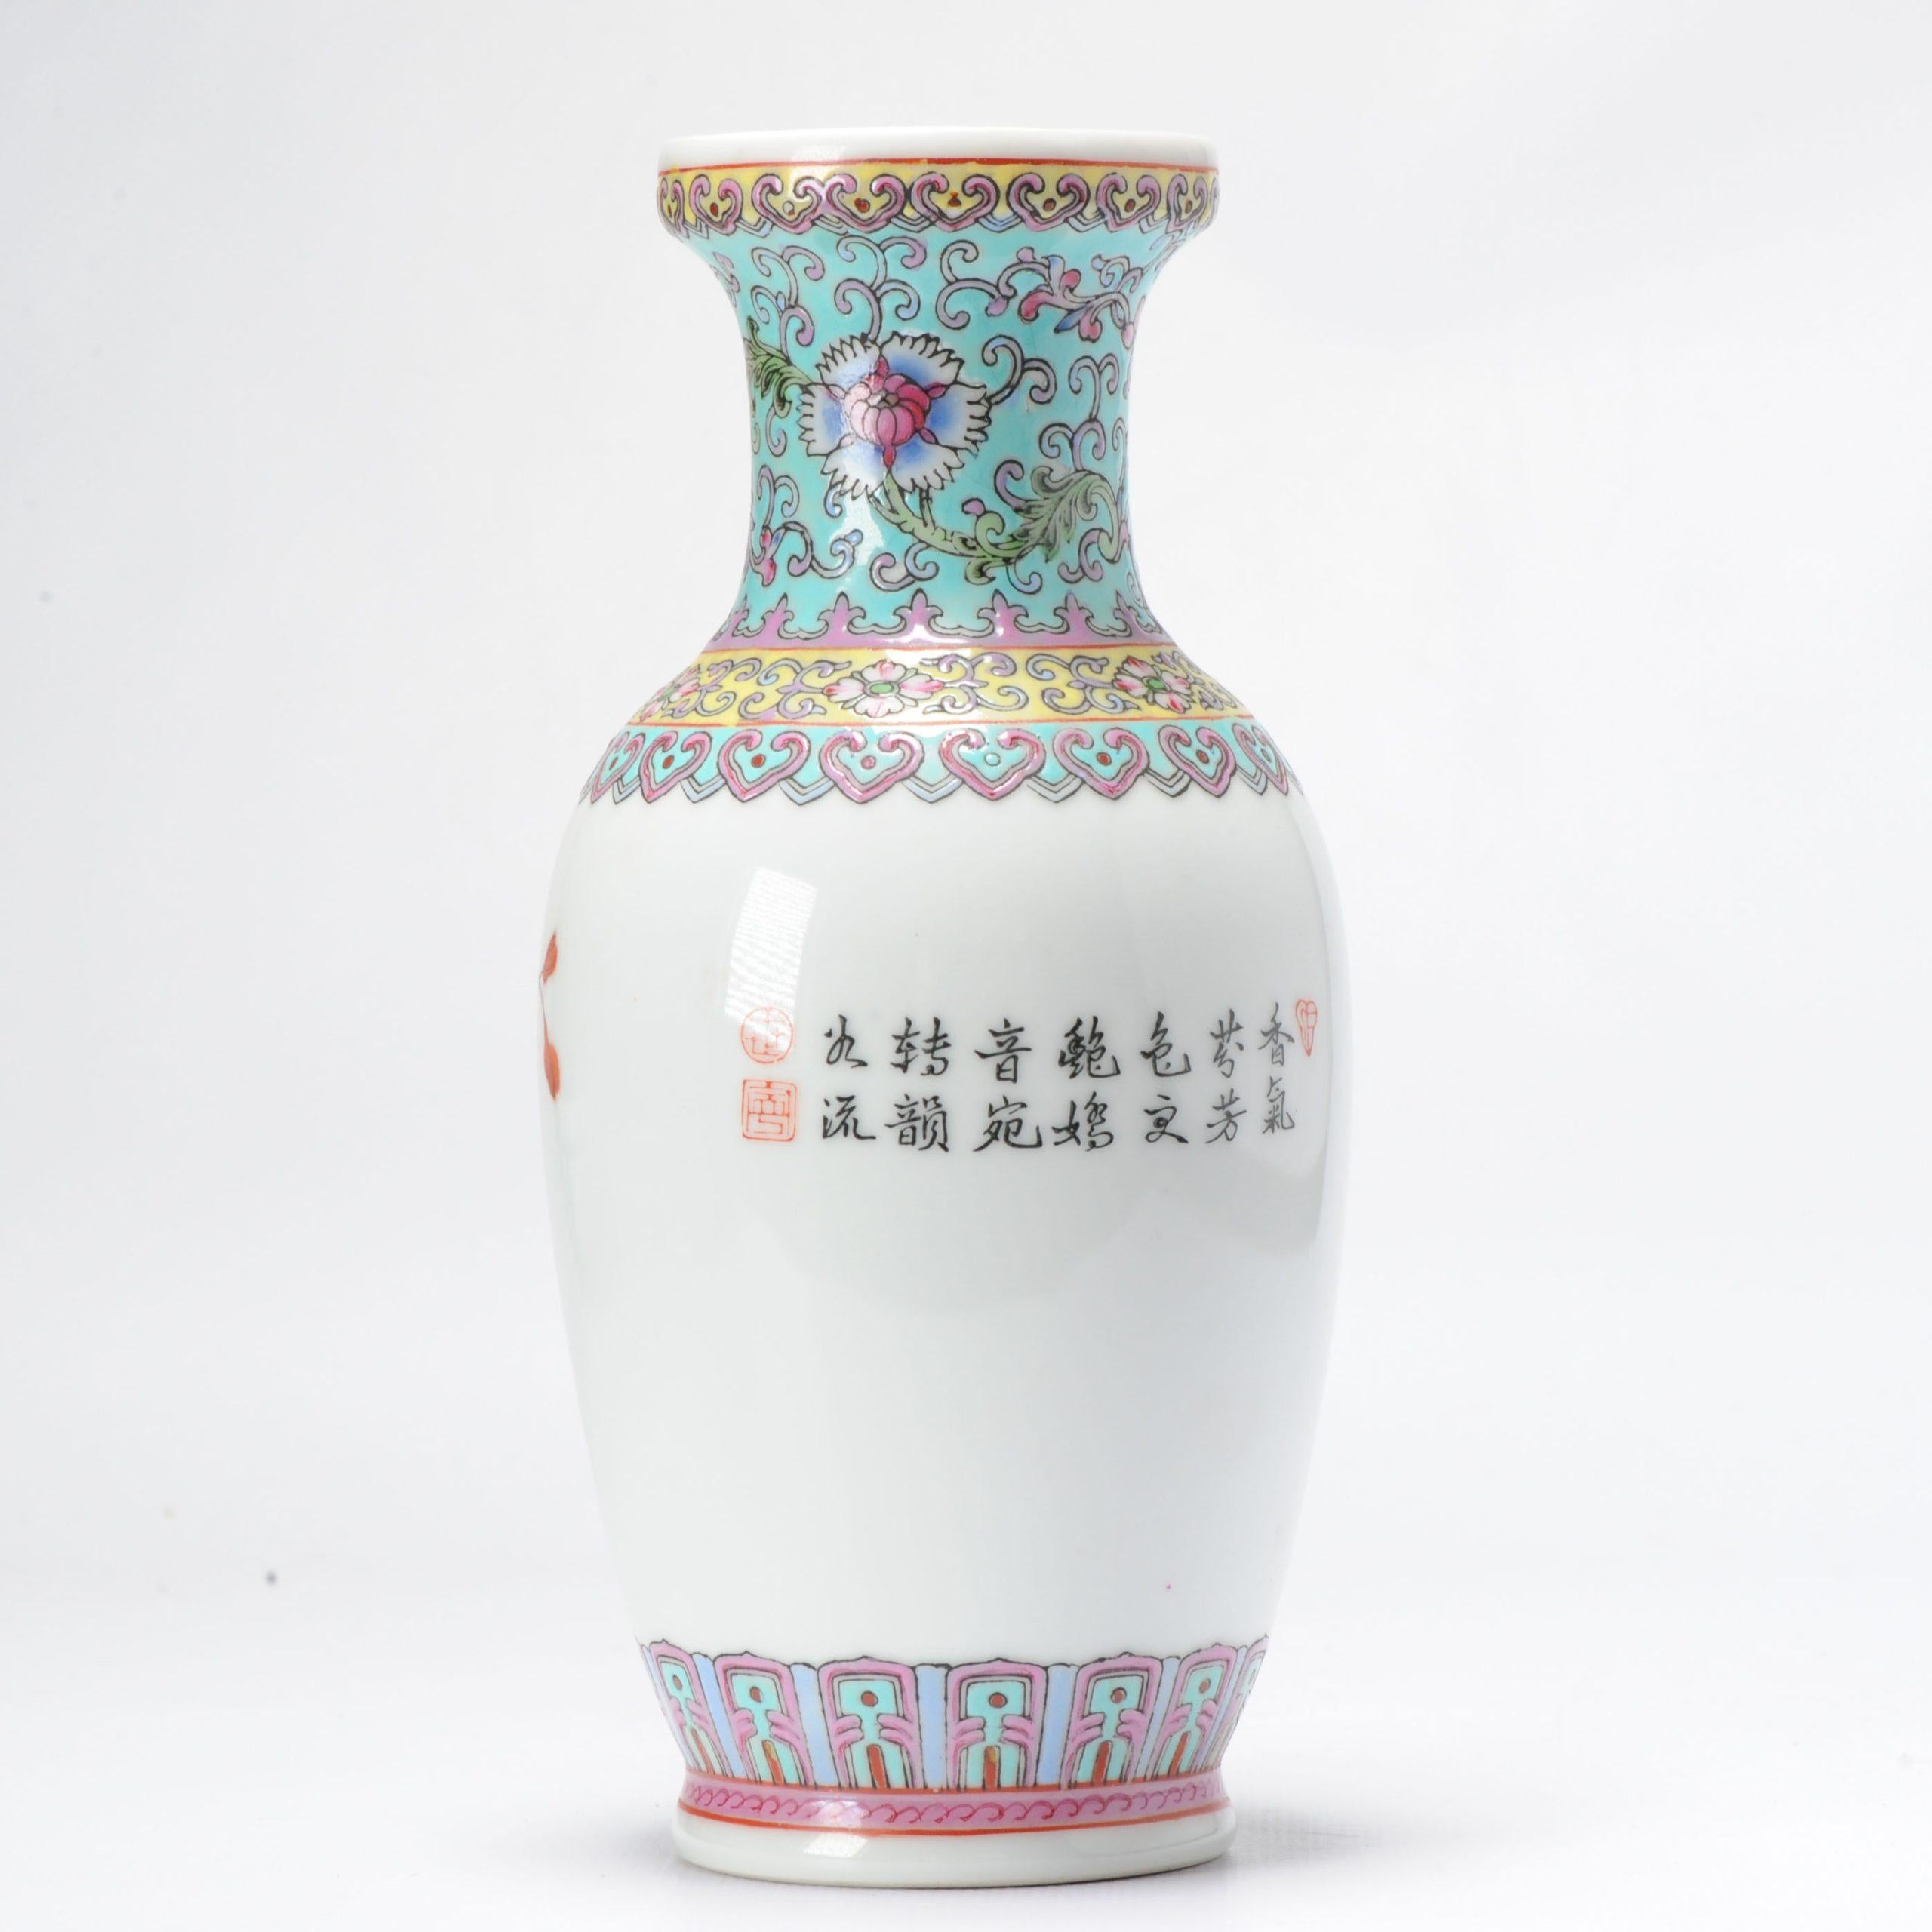 A polychrome porcelain vase. Marked with characters Qianlong. China, 20th century.

Very nice and unusual scene.

Additional information:
Material: Porcelain & Pottery
Type: Vase
Region of Origin: China
Period: 20th century PRoC (1949 -